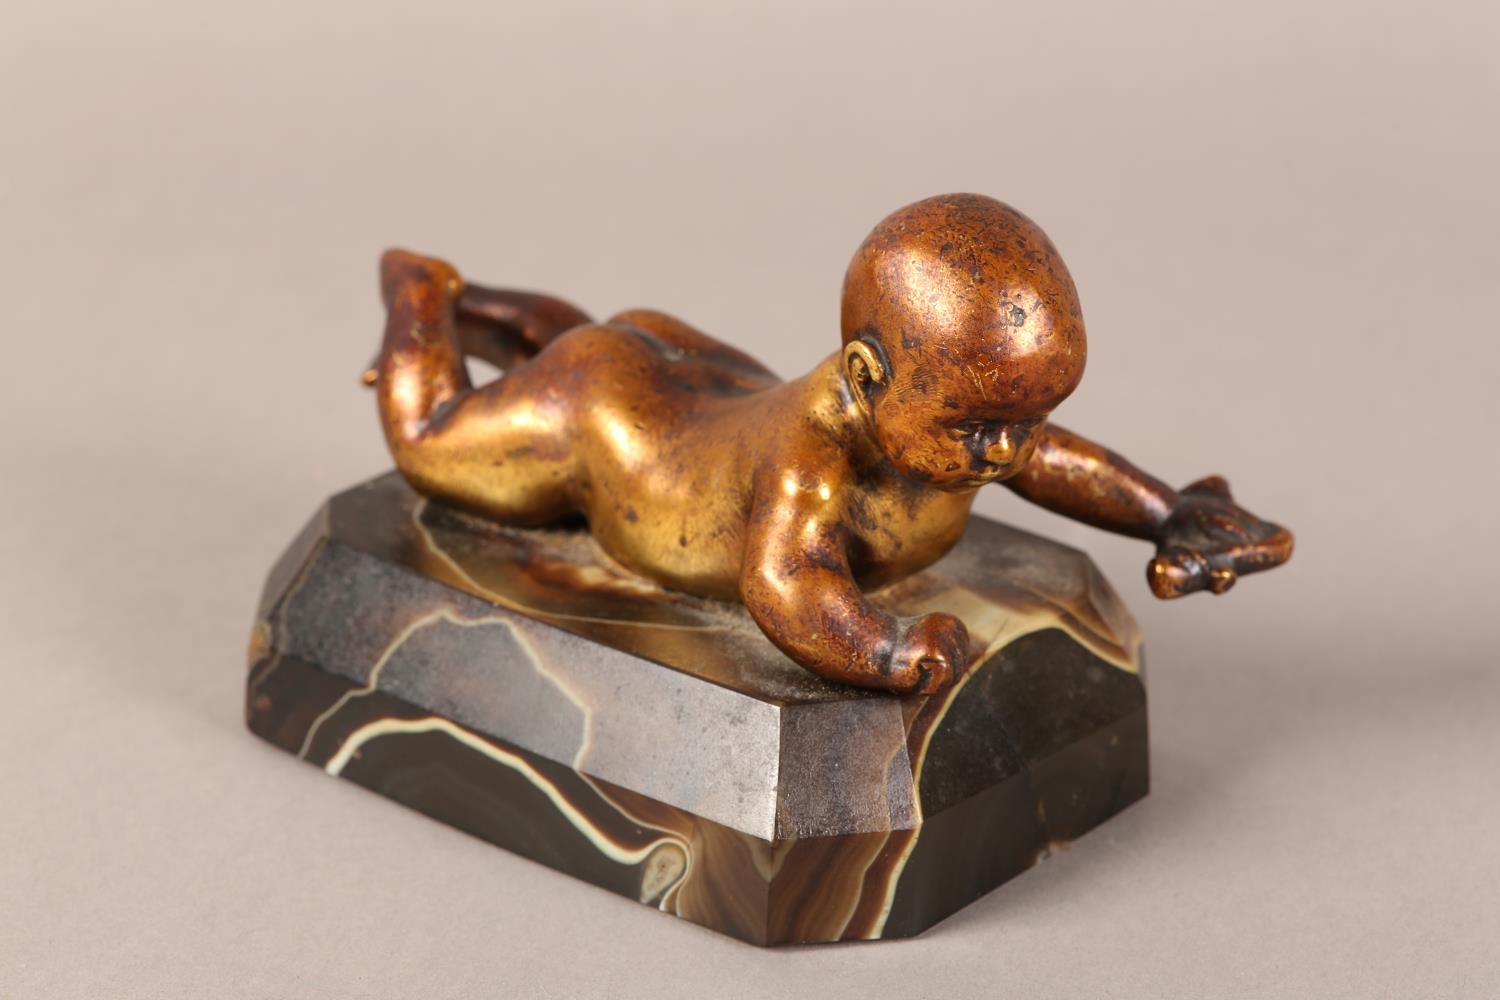 A gilded bronze figure of an infant lying on it's stomach, on an agate base, 14.5cm long x 9.5cm